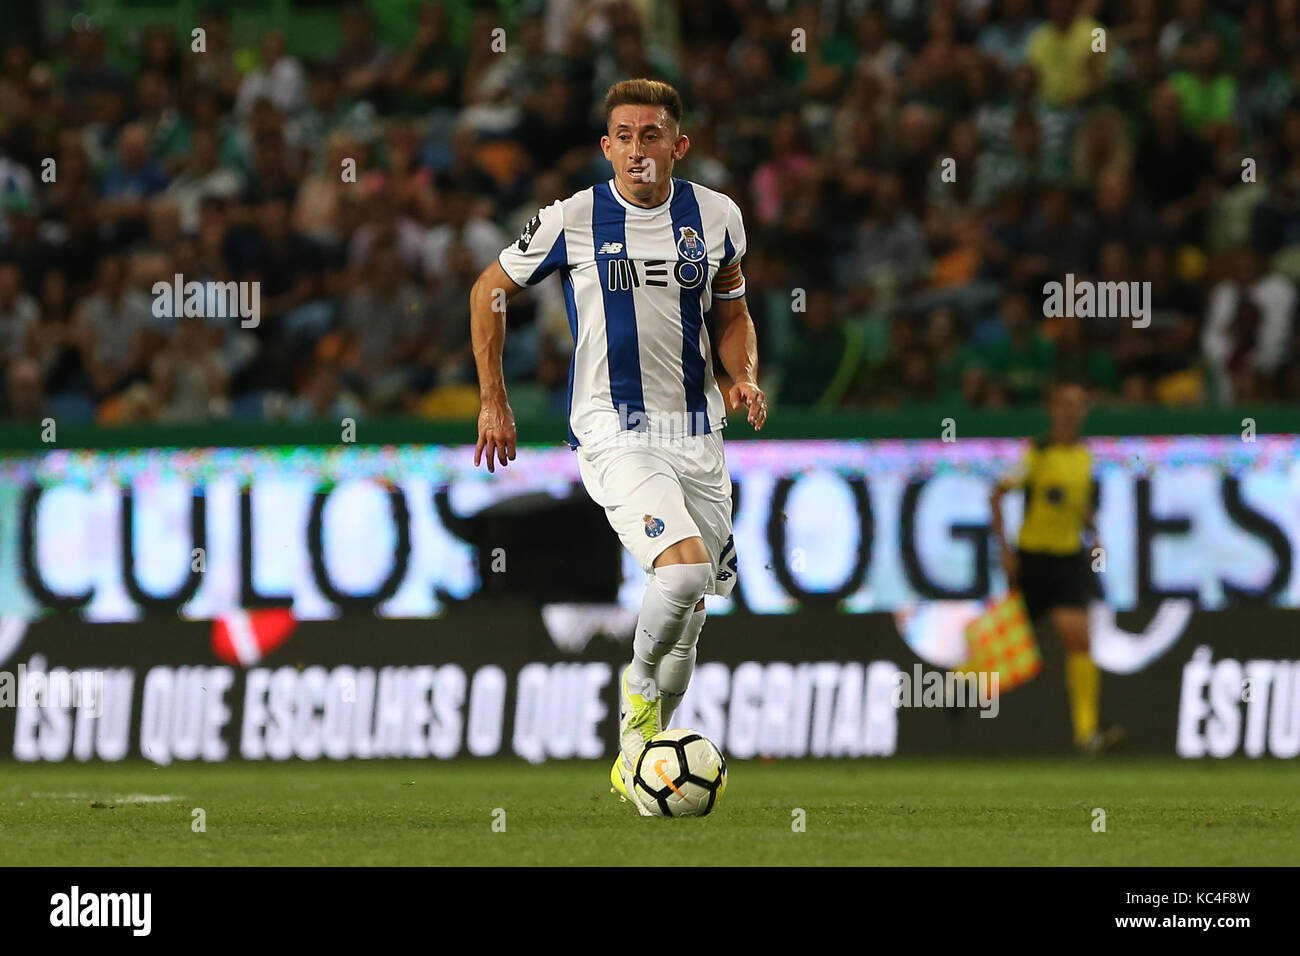 Lisbon, Portugal. 01st Oct, 2017. FC PortoÕs midfielder Hector Herrera from Mexico  during Premier League 2017/18 match between Sporting CP and FC Porto, at Alvalade Stadium in Lisbon on October 1, 2017. (Photo by Bruno Barros / DPI) Credit: Bruno Barros/Alamy Live News Stock Photo